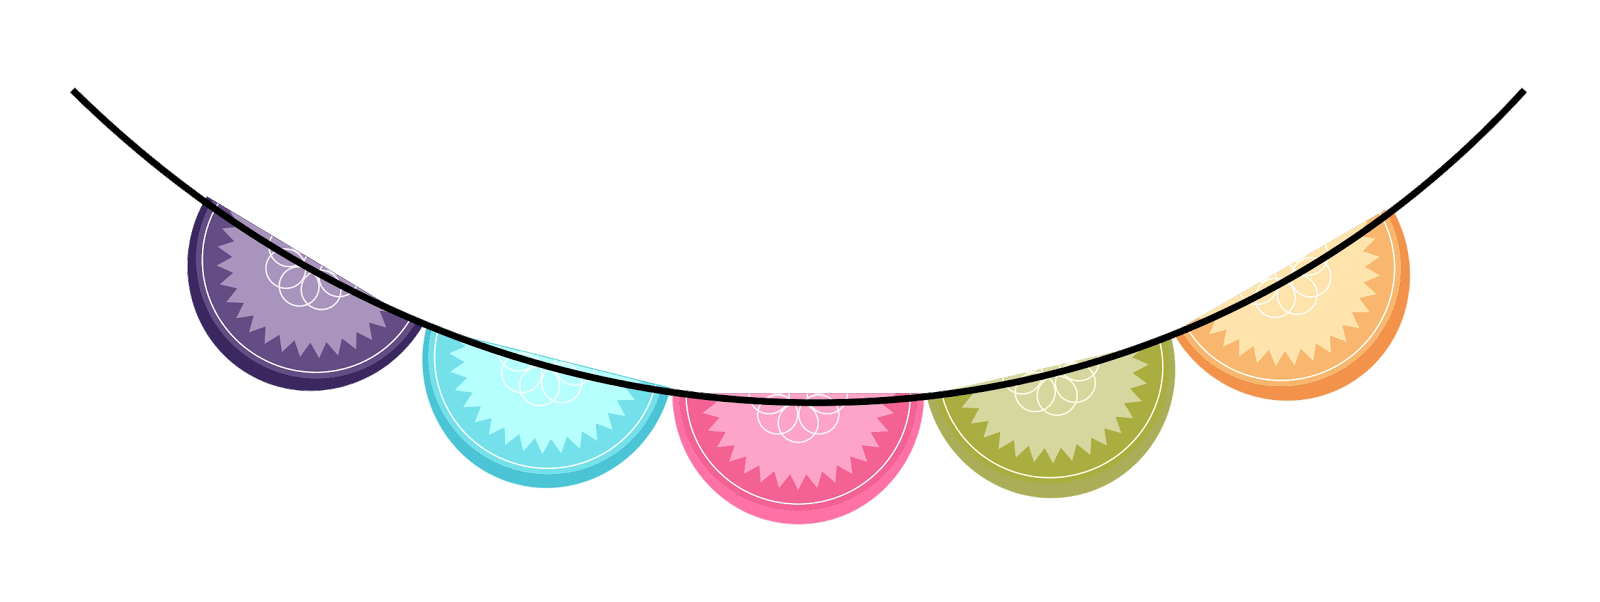 Free Cute Banner Png, Download Free Clip Art, Free Clip Art